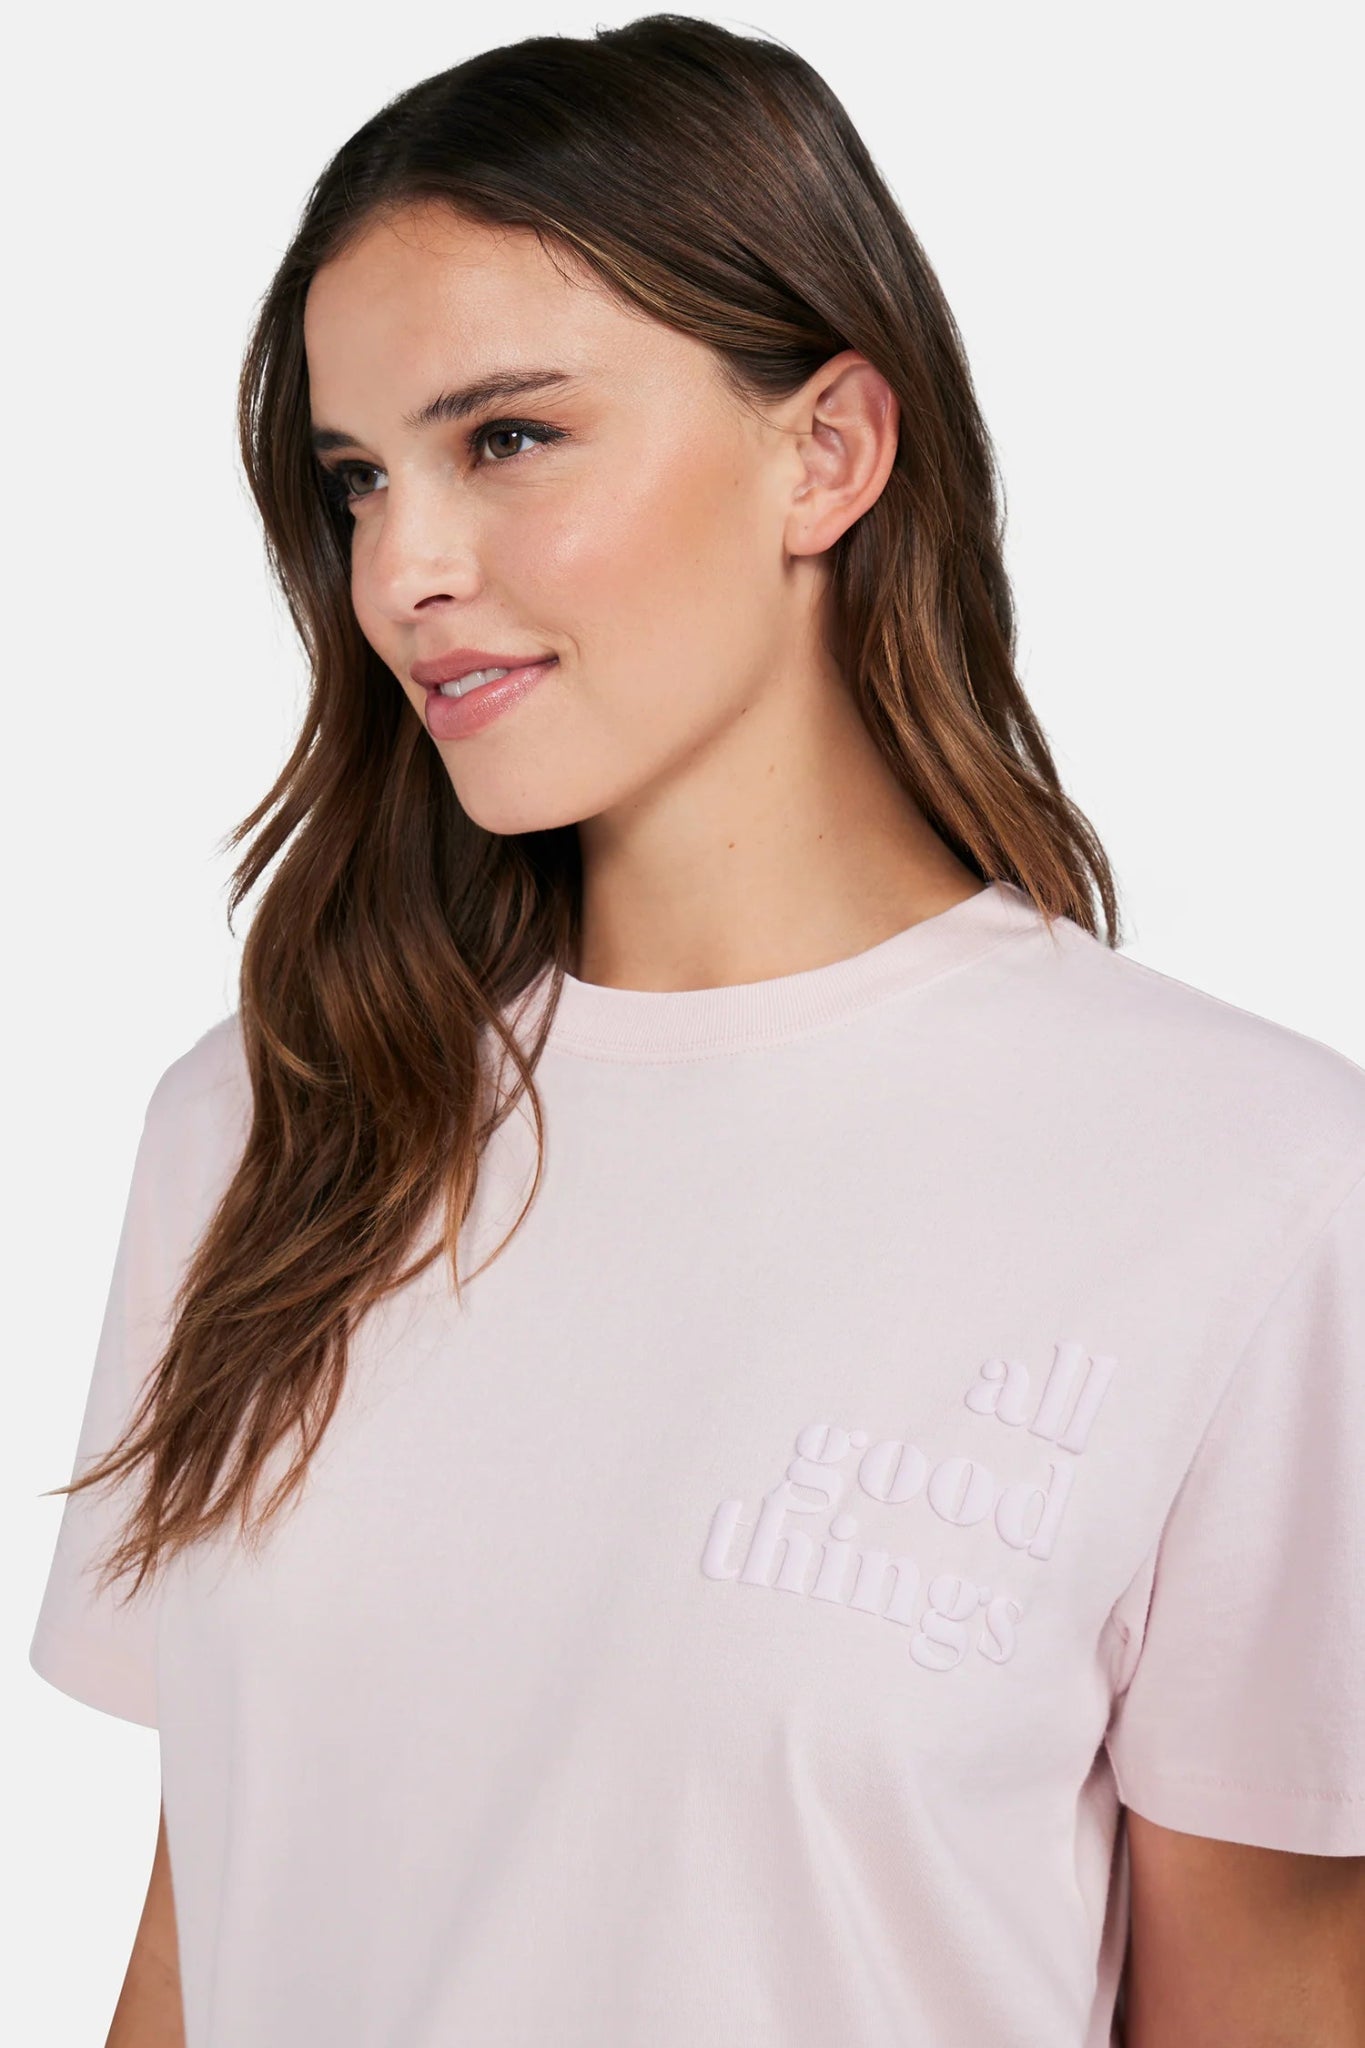 Shop Wildfox All Good Things Ryan Tee - Premium T-Shirt from Wildfox Online now at Spoiled Brat 